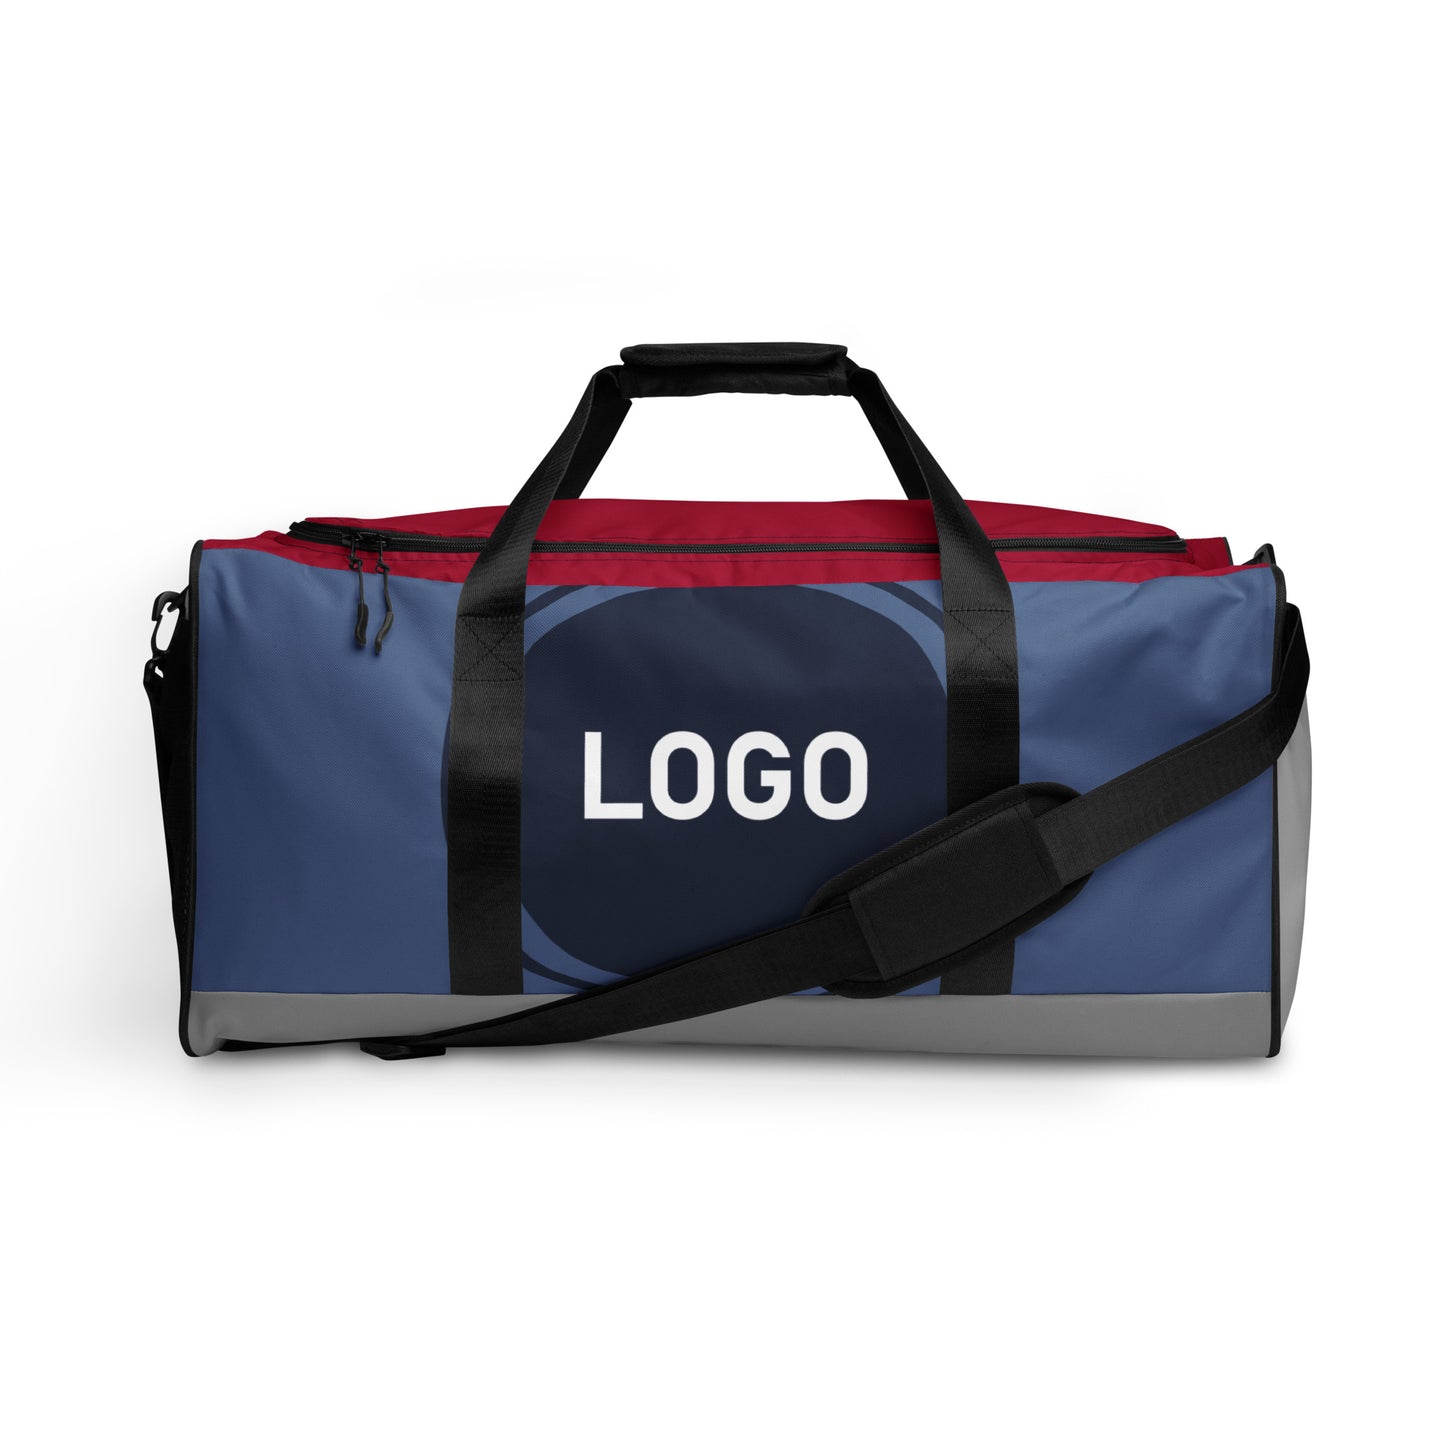 TIME OF VIBES - Travel Bag CORPORATE - €159.00